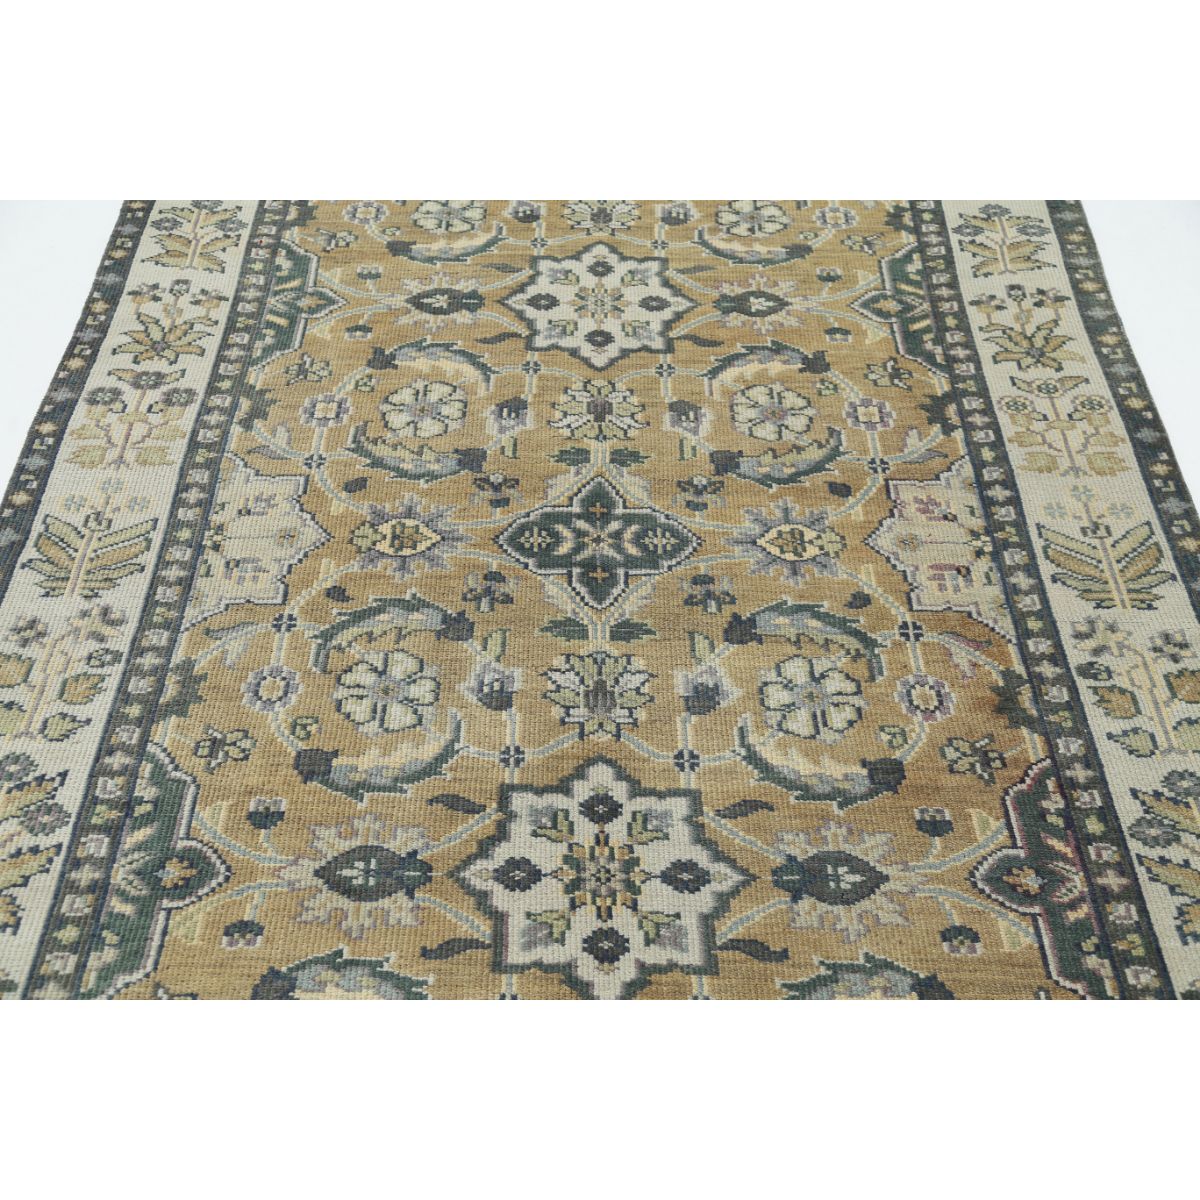 Vintage 5'2" X 8'2" Wool Hand-Knotted Rug